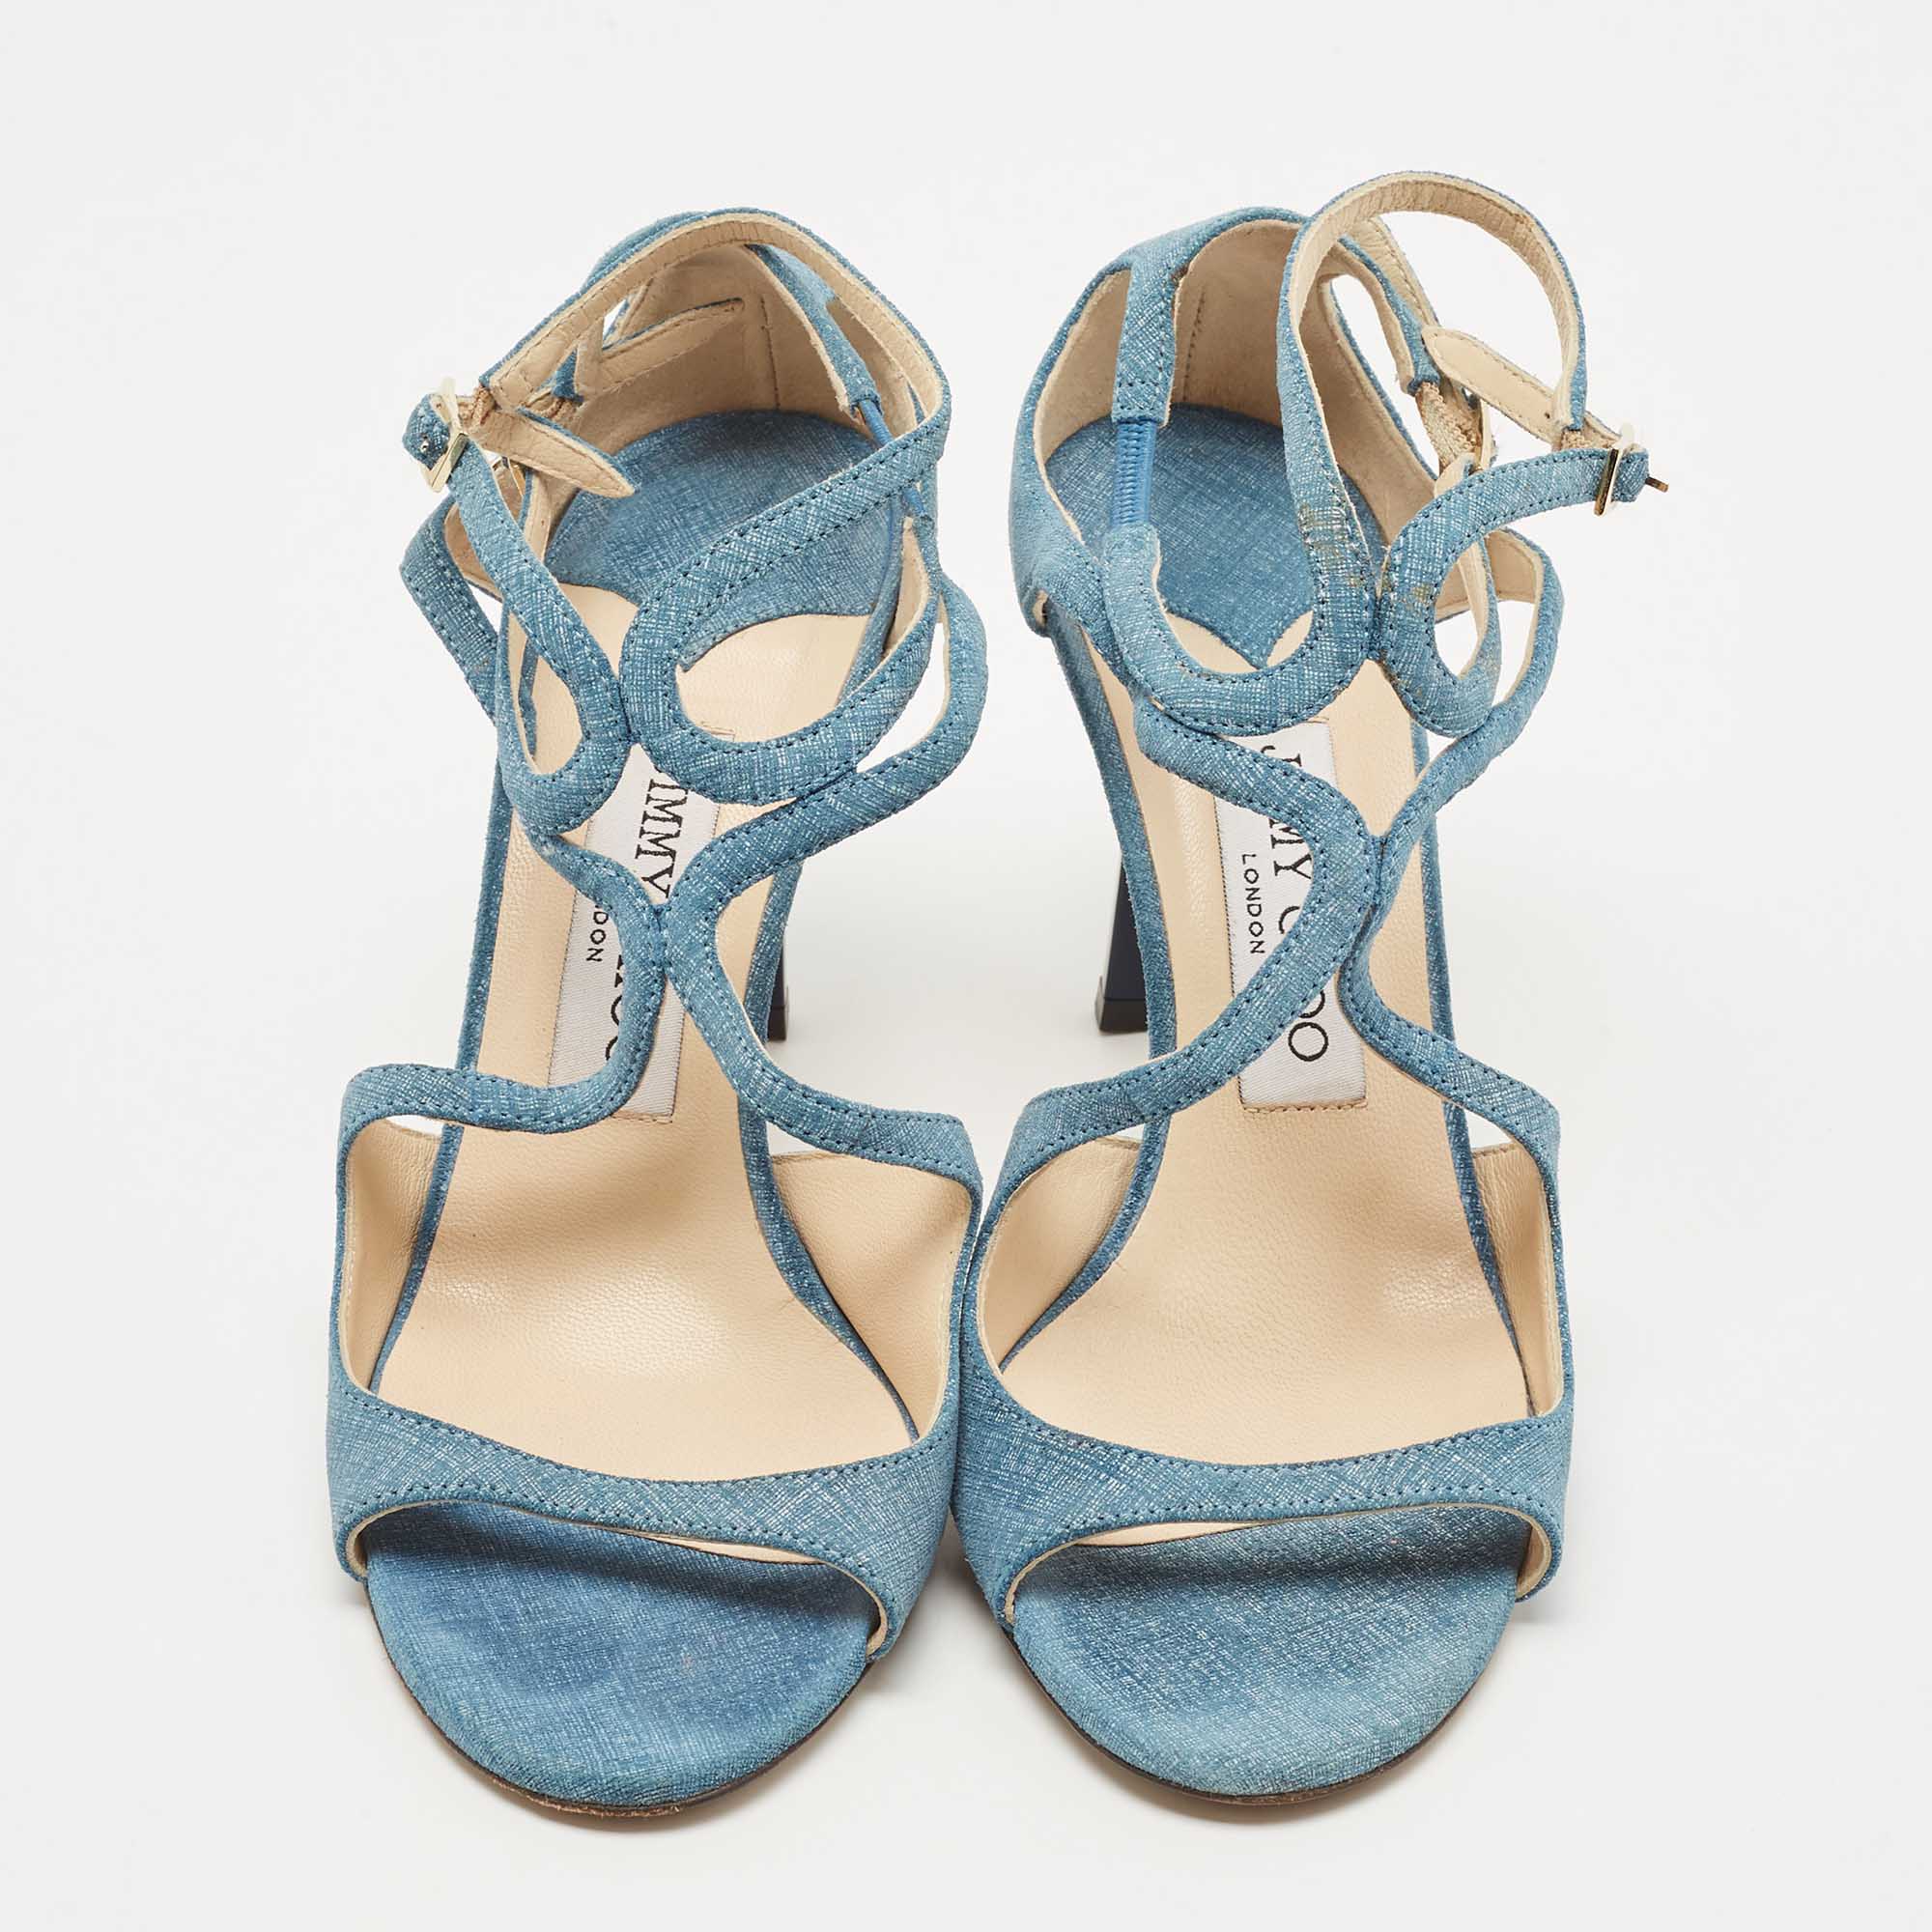 Jimmy Choo Blue Texture Suede Lang Ankle Strap Sandals Size 36.5